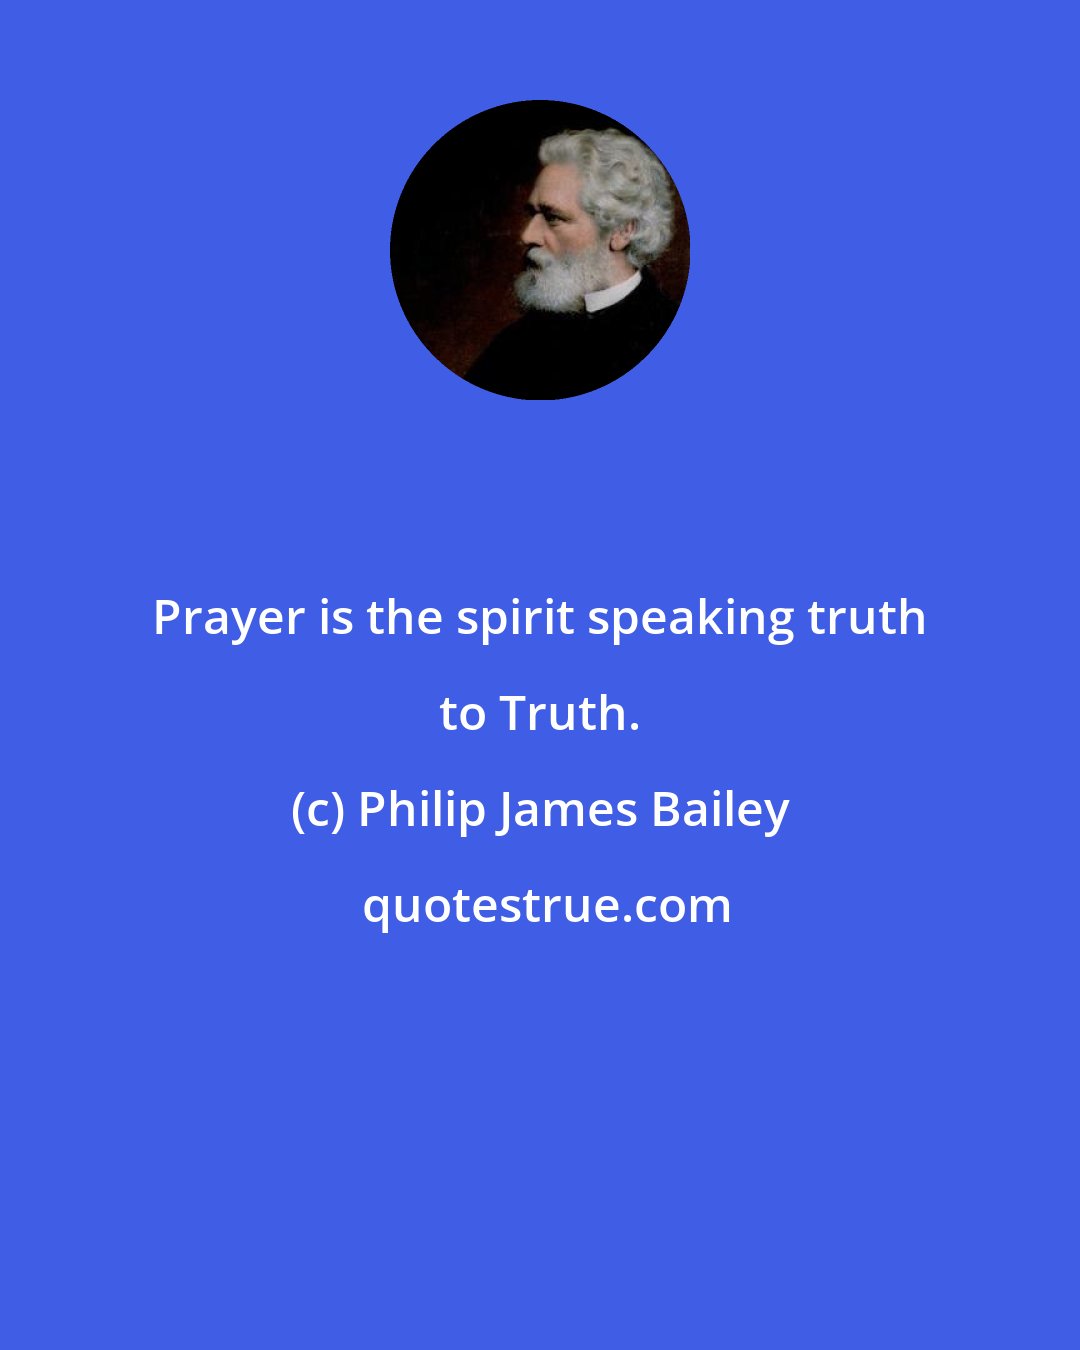 Philip James Bailey: Prayer is the spirit speaking truth to Truth.